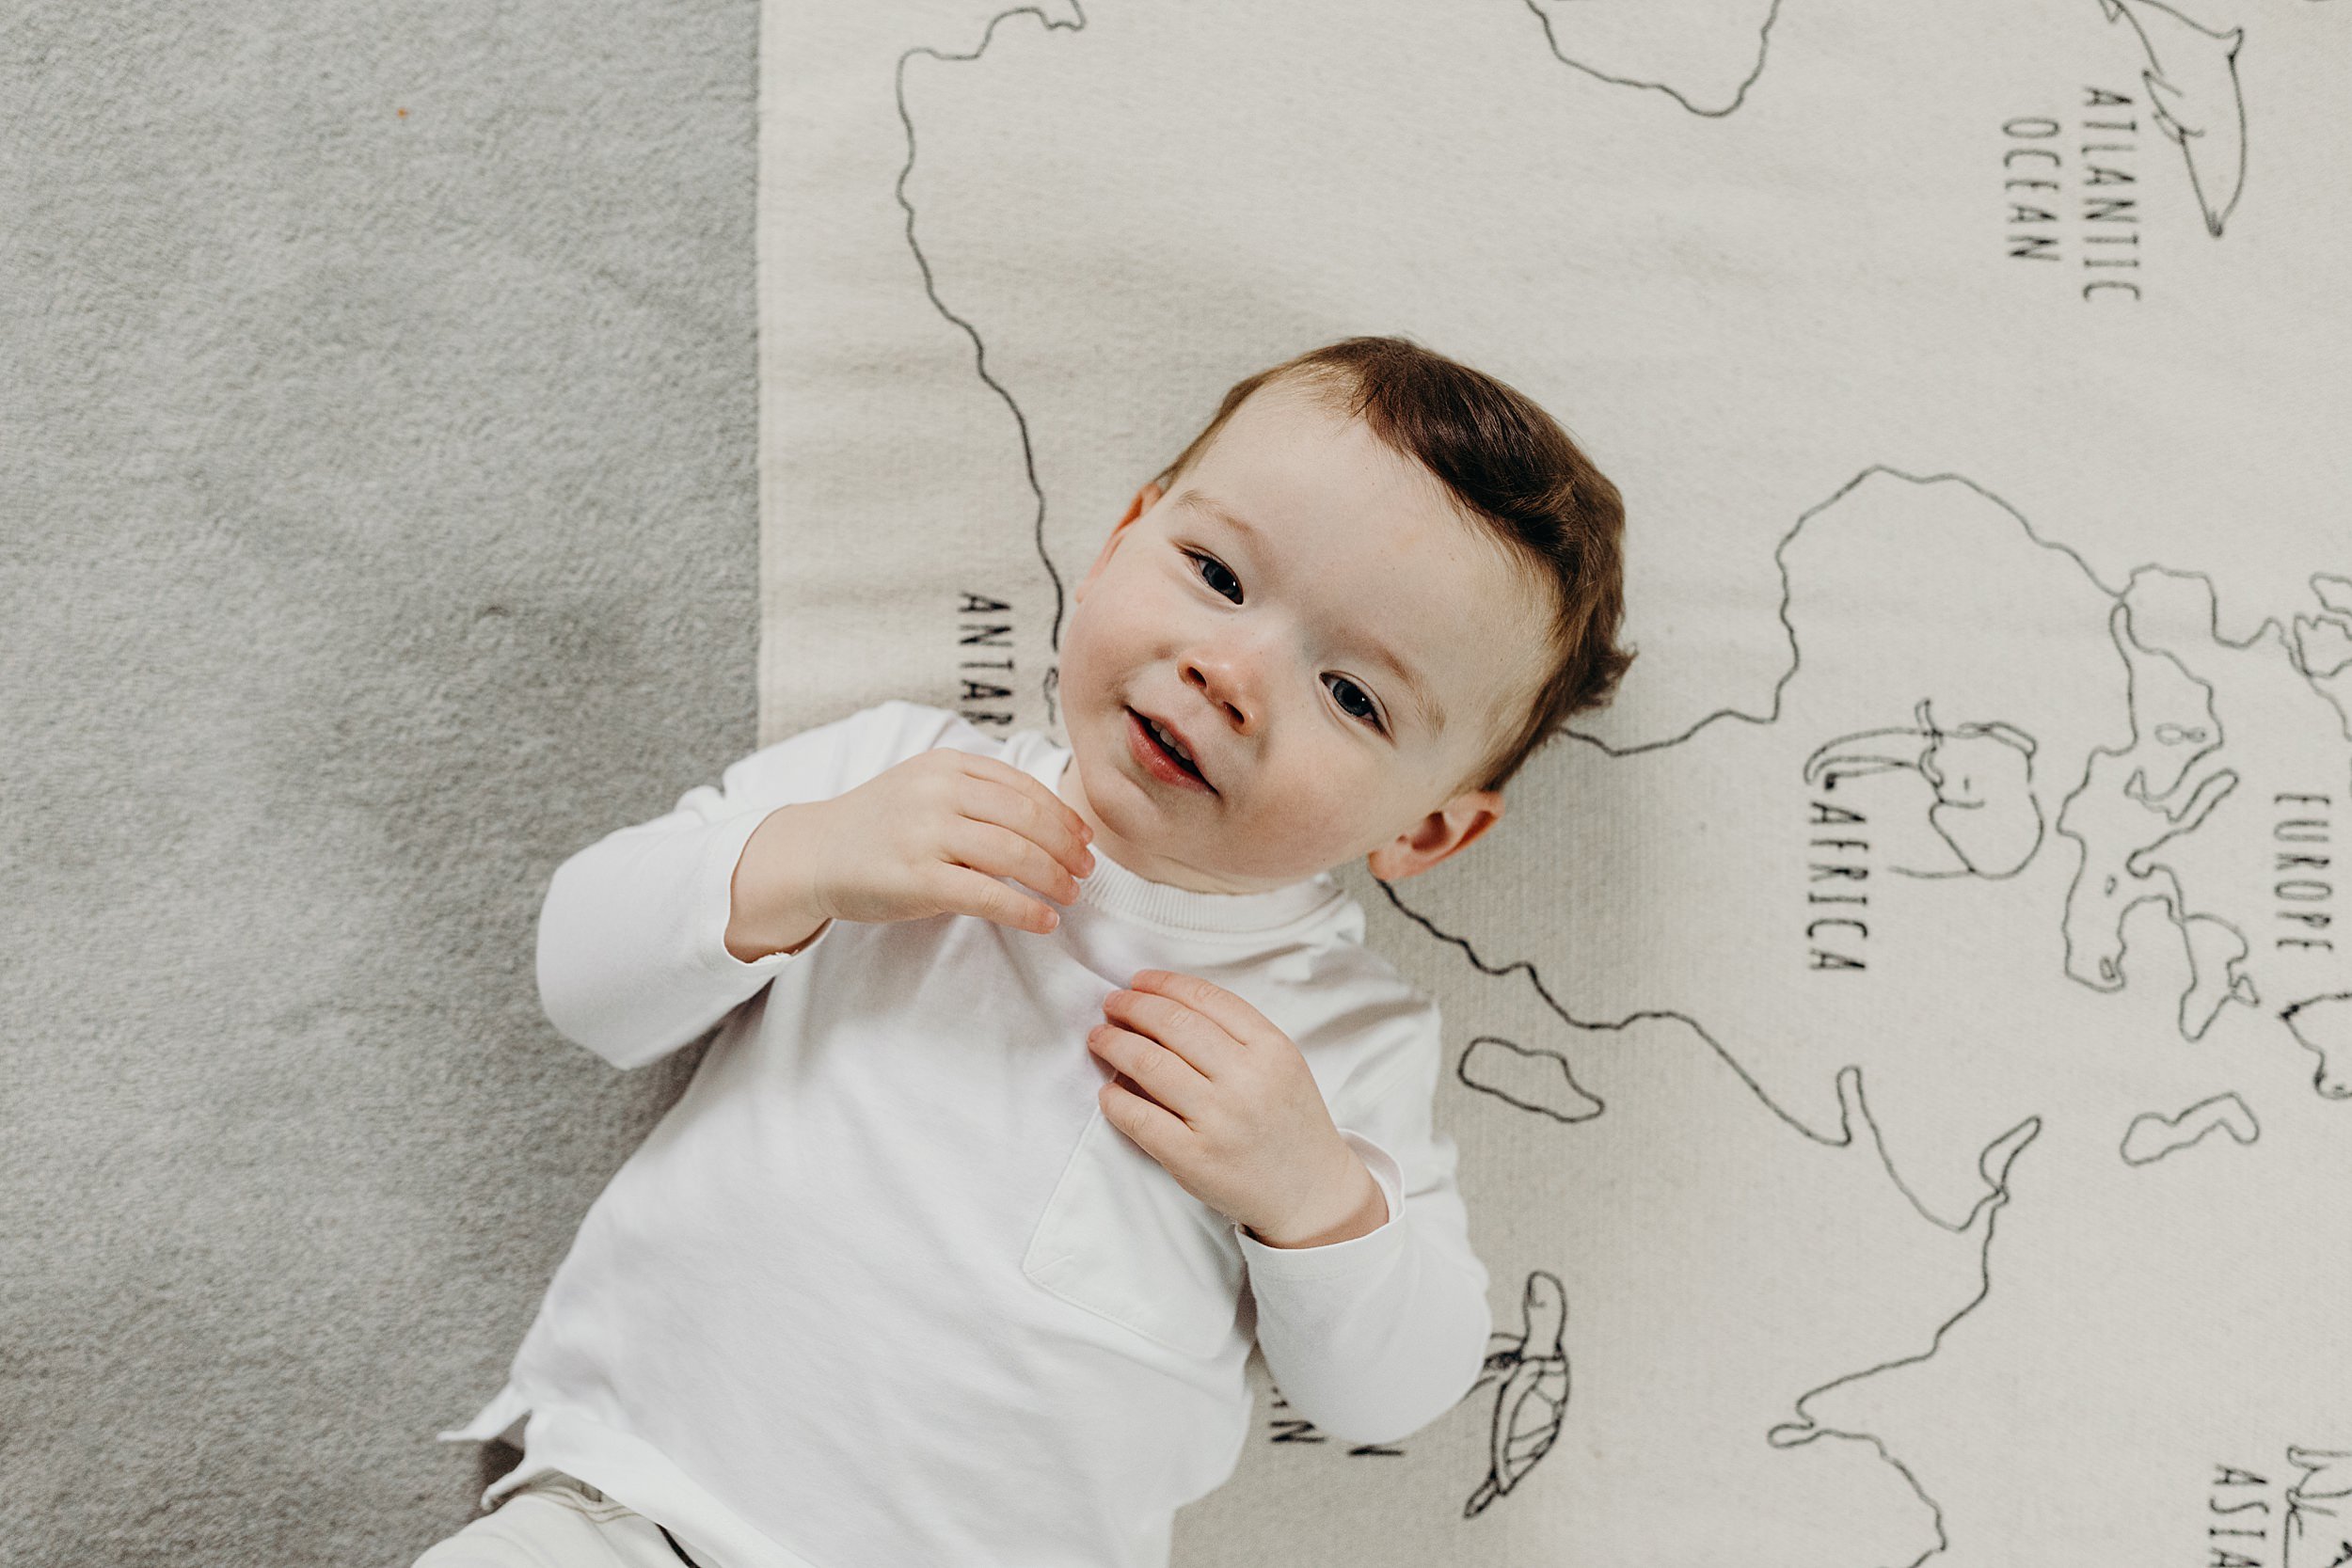 family photographer glasgow captures toddler boy with red hair lying on a map of the world mat